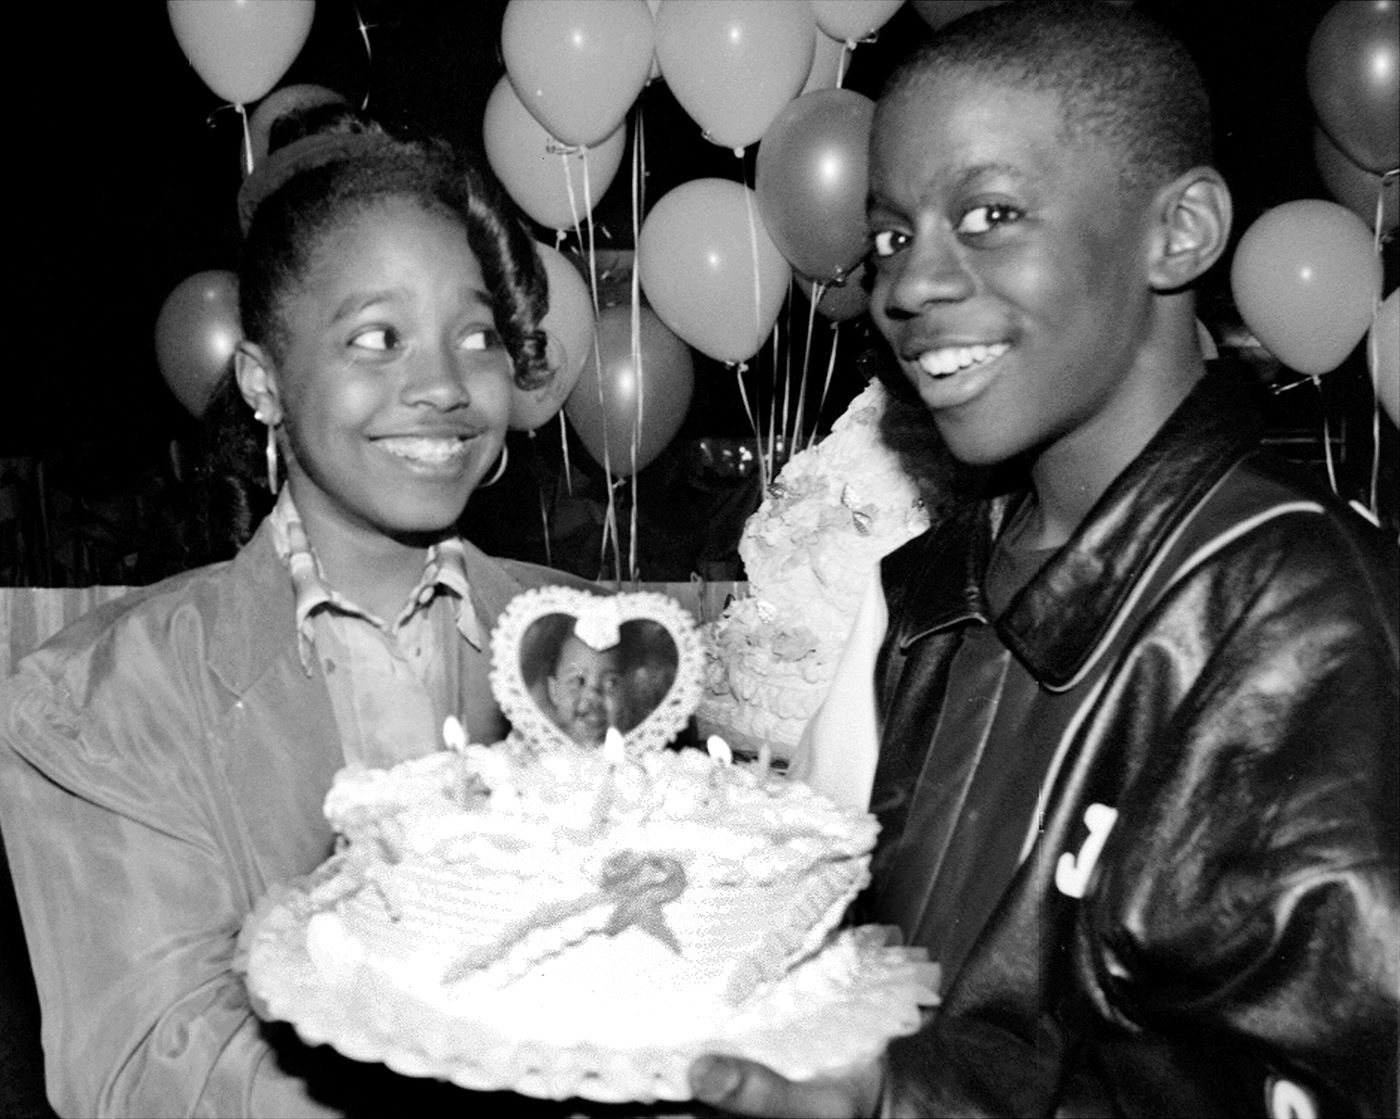 A black and white photo of Keshia Knight Pulliam and Deon Richmond holding a birthday cake with a heart on top and balloons in the background.